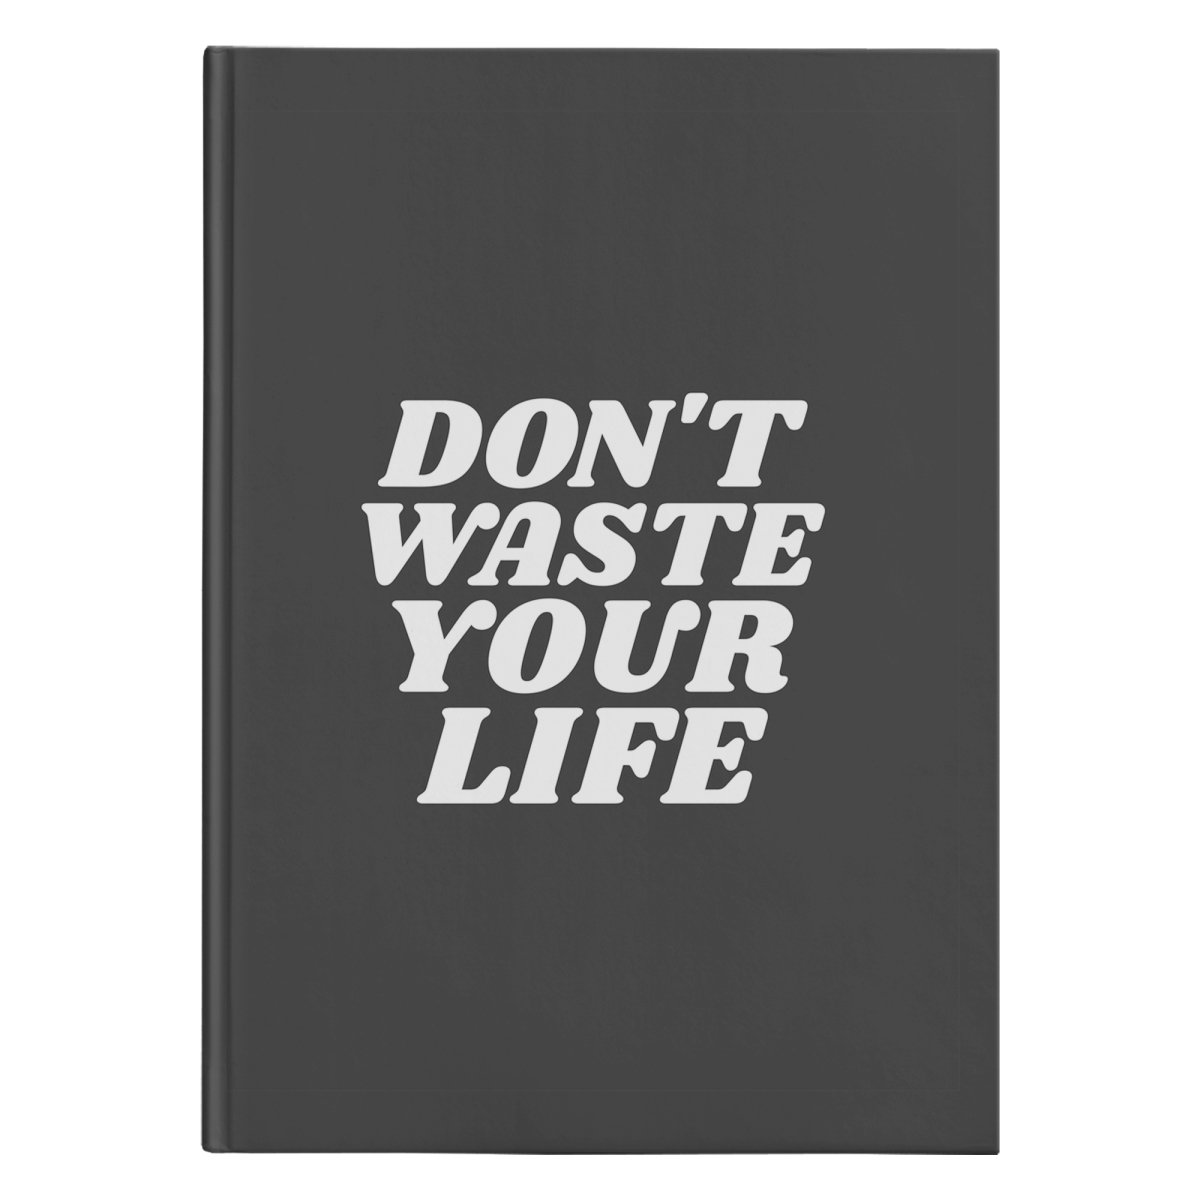 Don't Waste Your Life (150 Page Hardcover Journal) - SDG Clothing